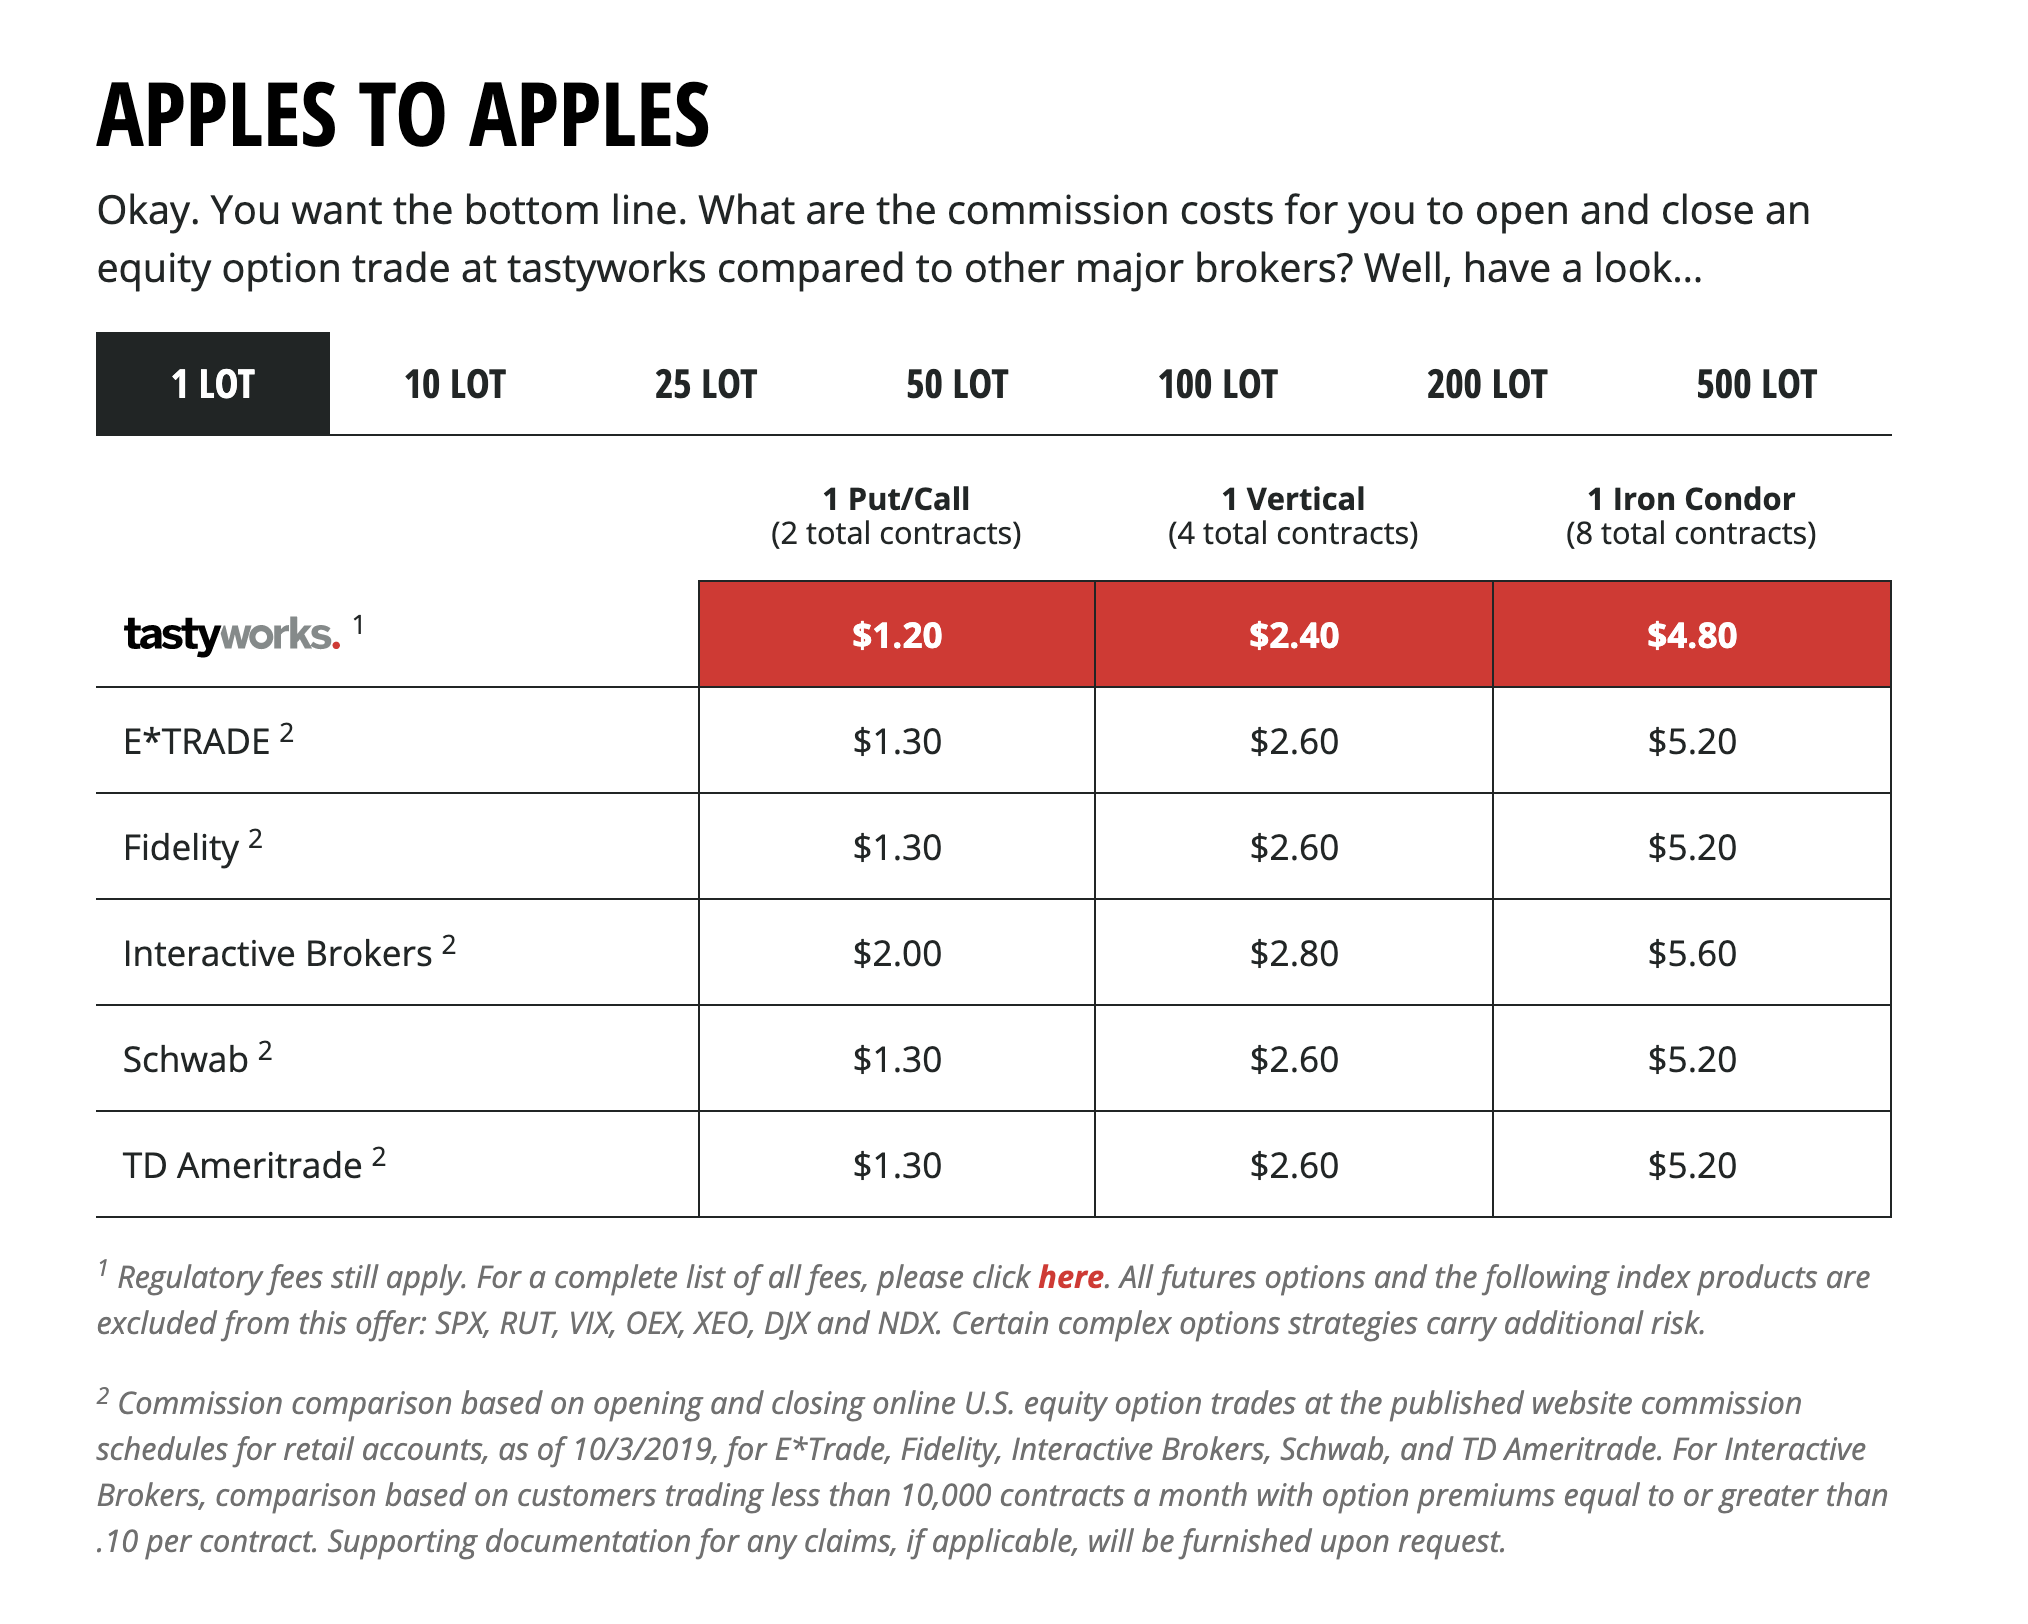 tastyworks option assignment fee